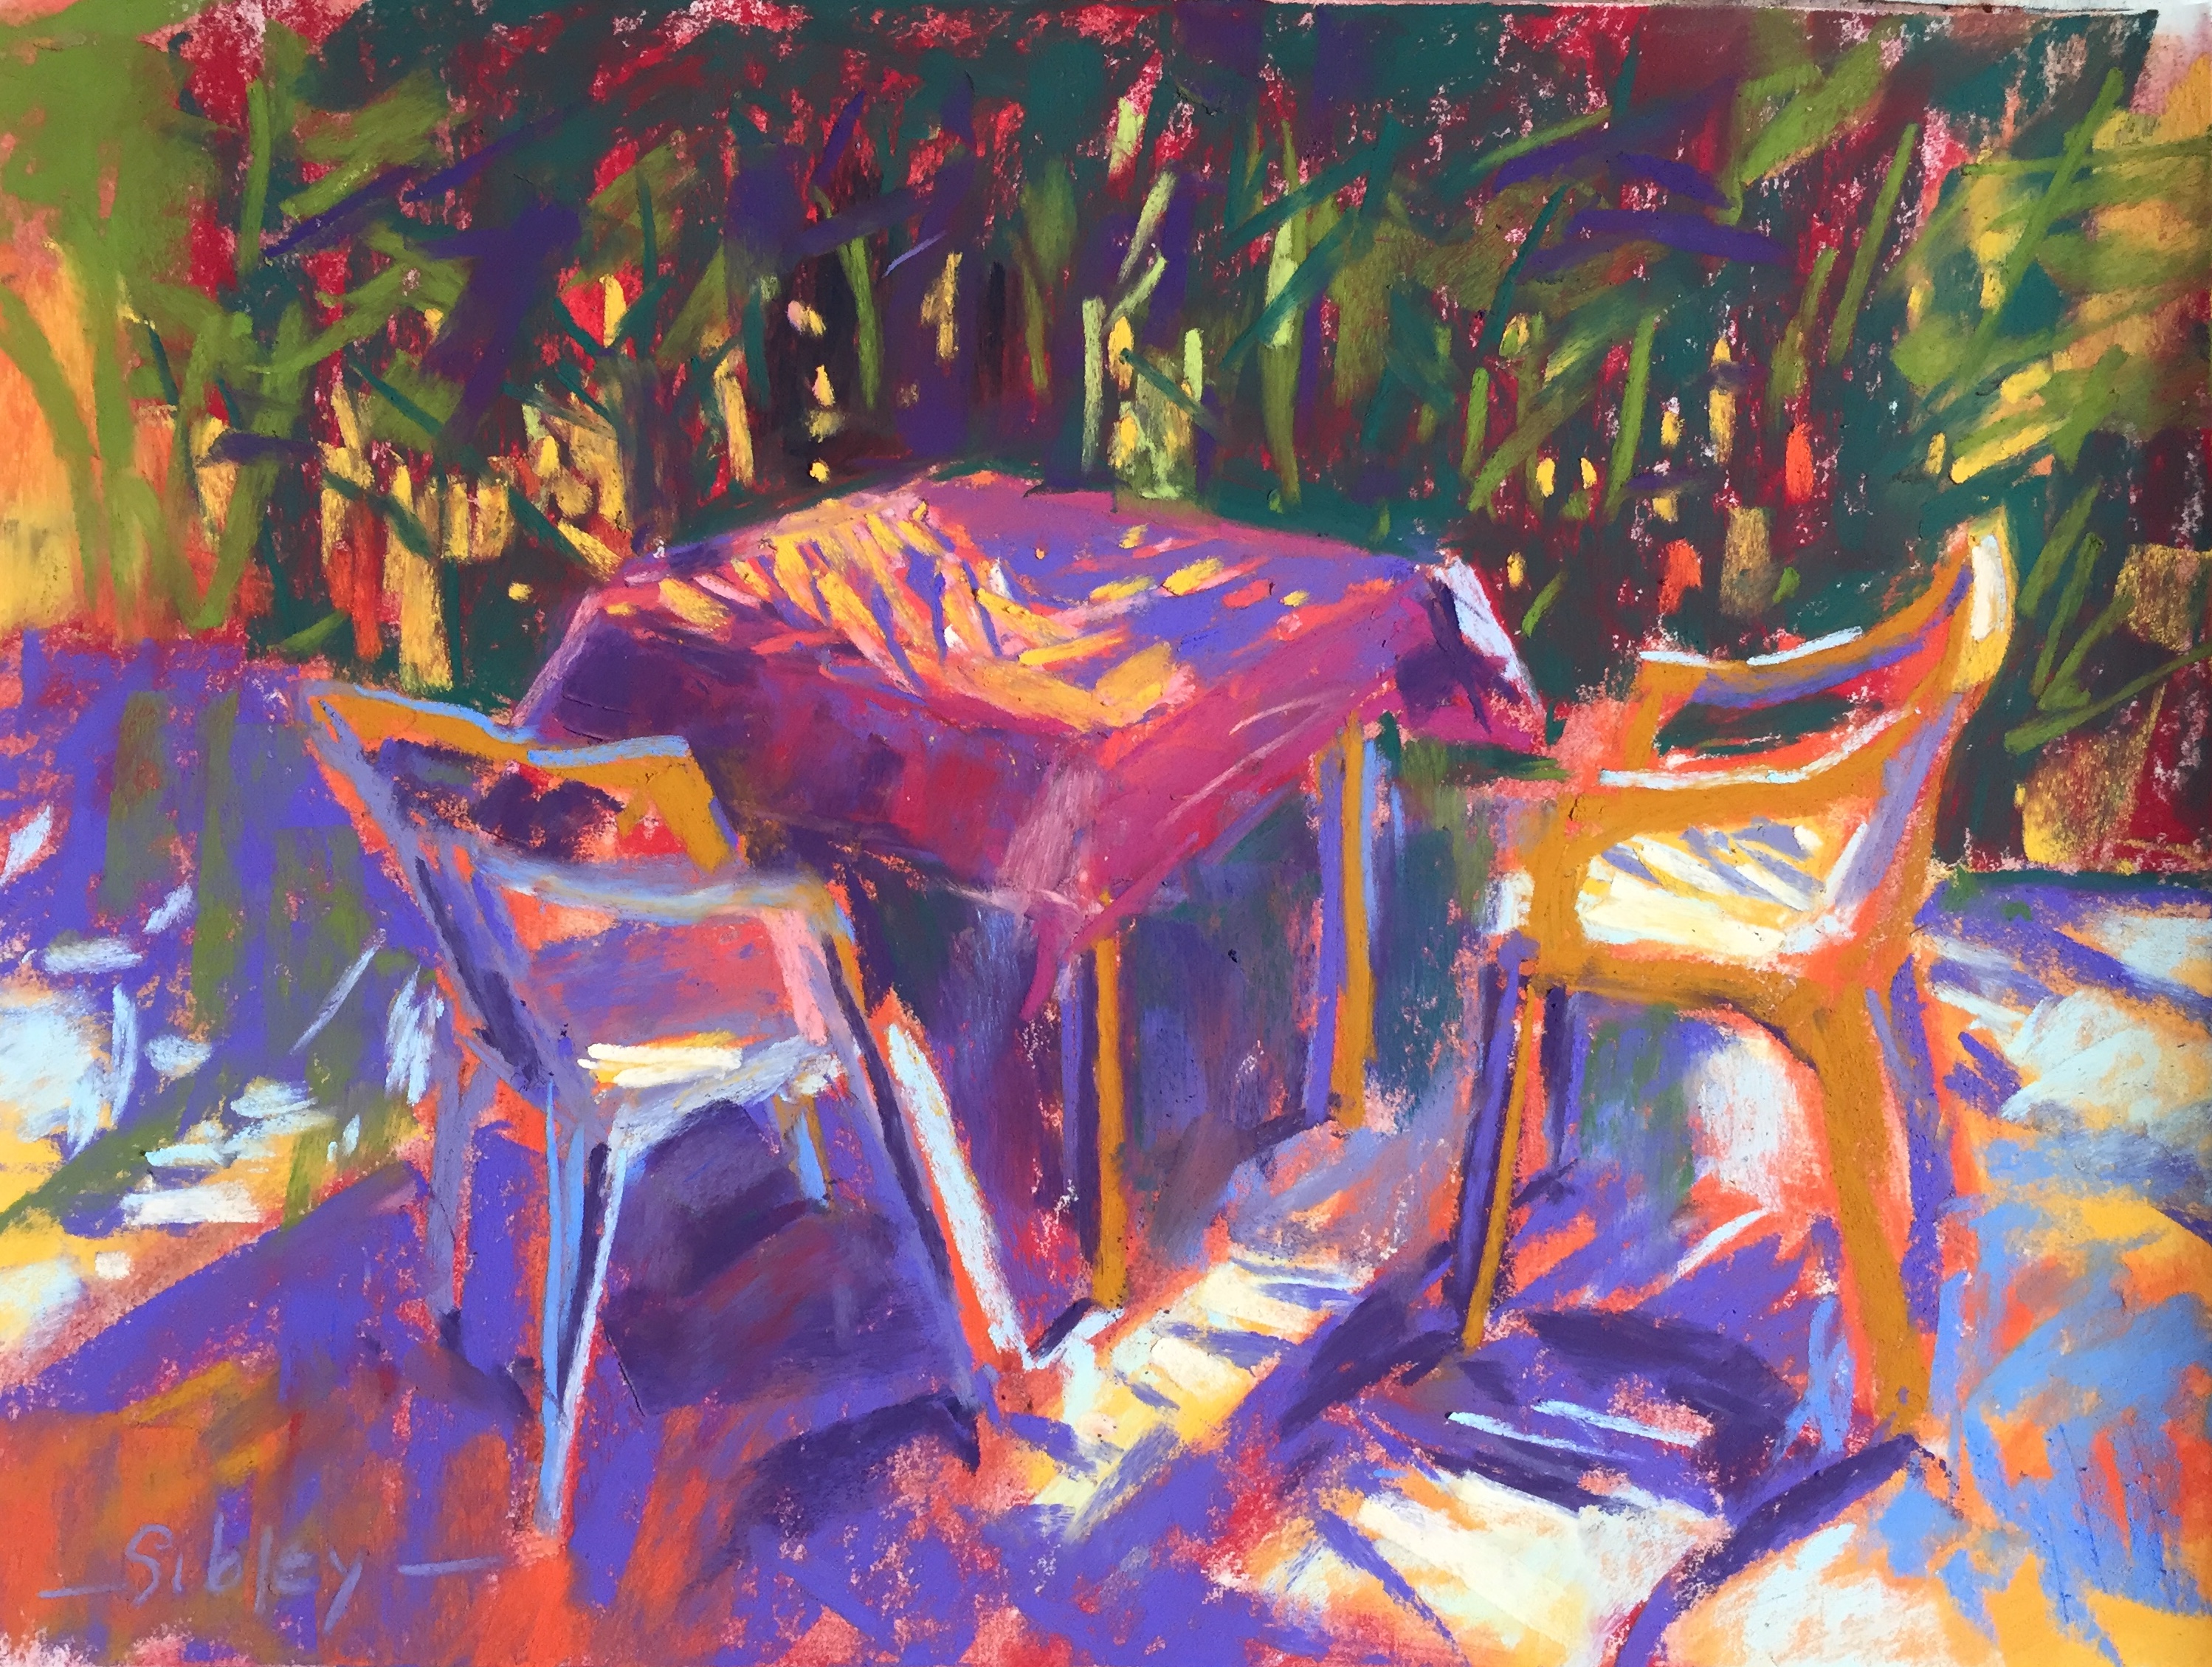 Chaos of Light And Shadow: 9. Tweaked and finished. Gail Sibley, “Gone to the Beach!,” Unison pastels on UART 400, 9 x 12 in